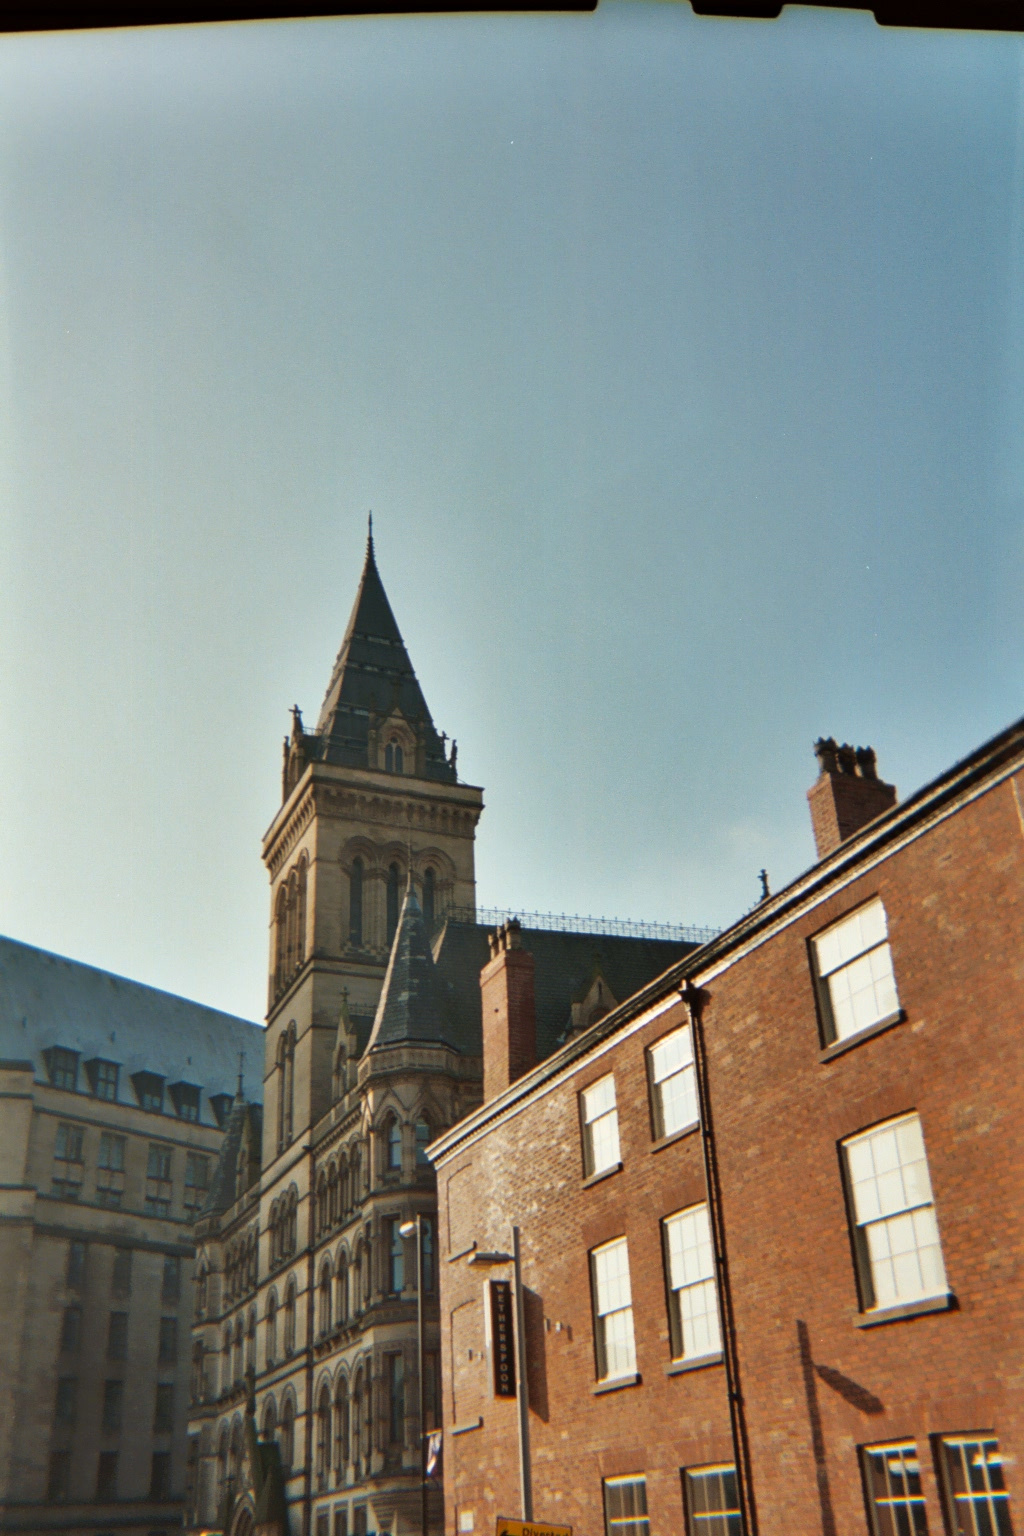 Town hall, St Peters Square, Manchester